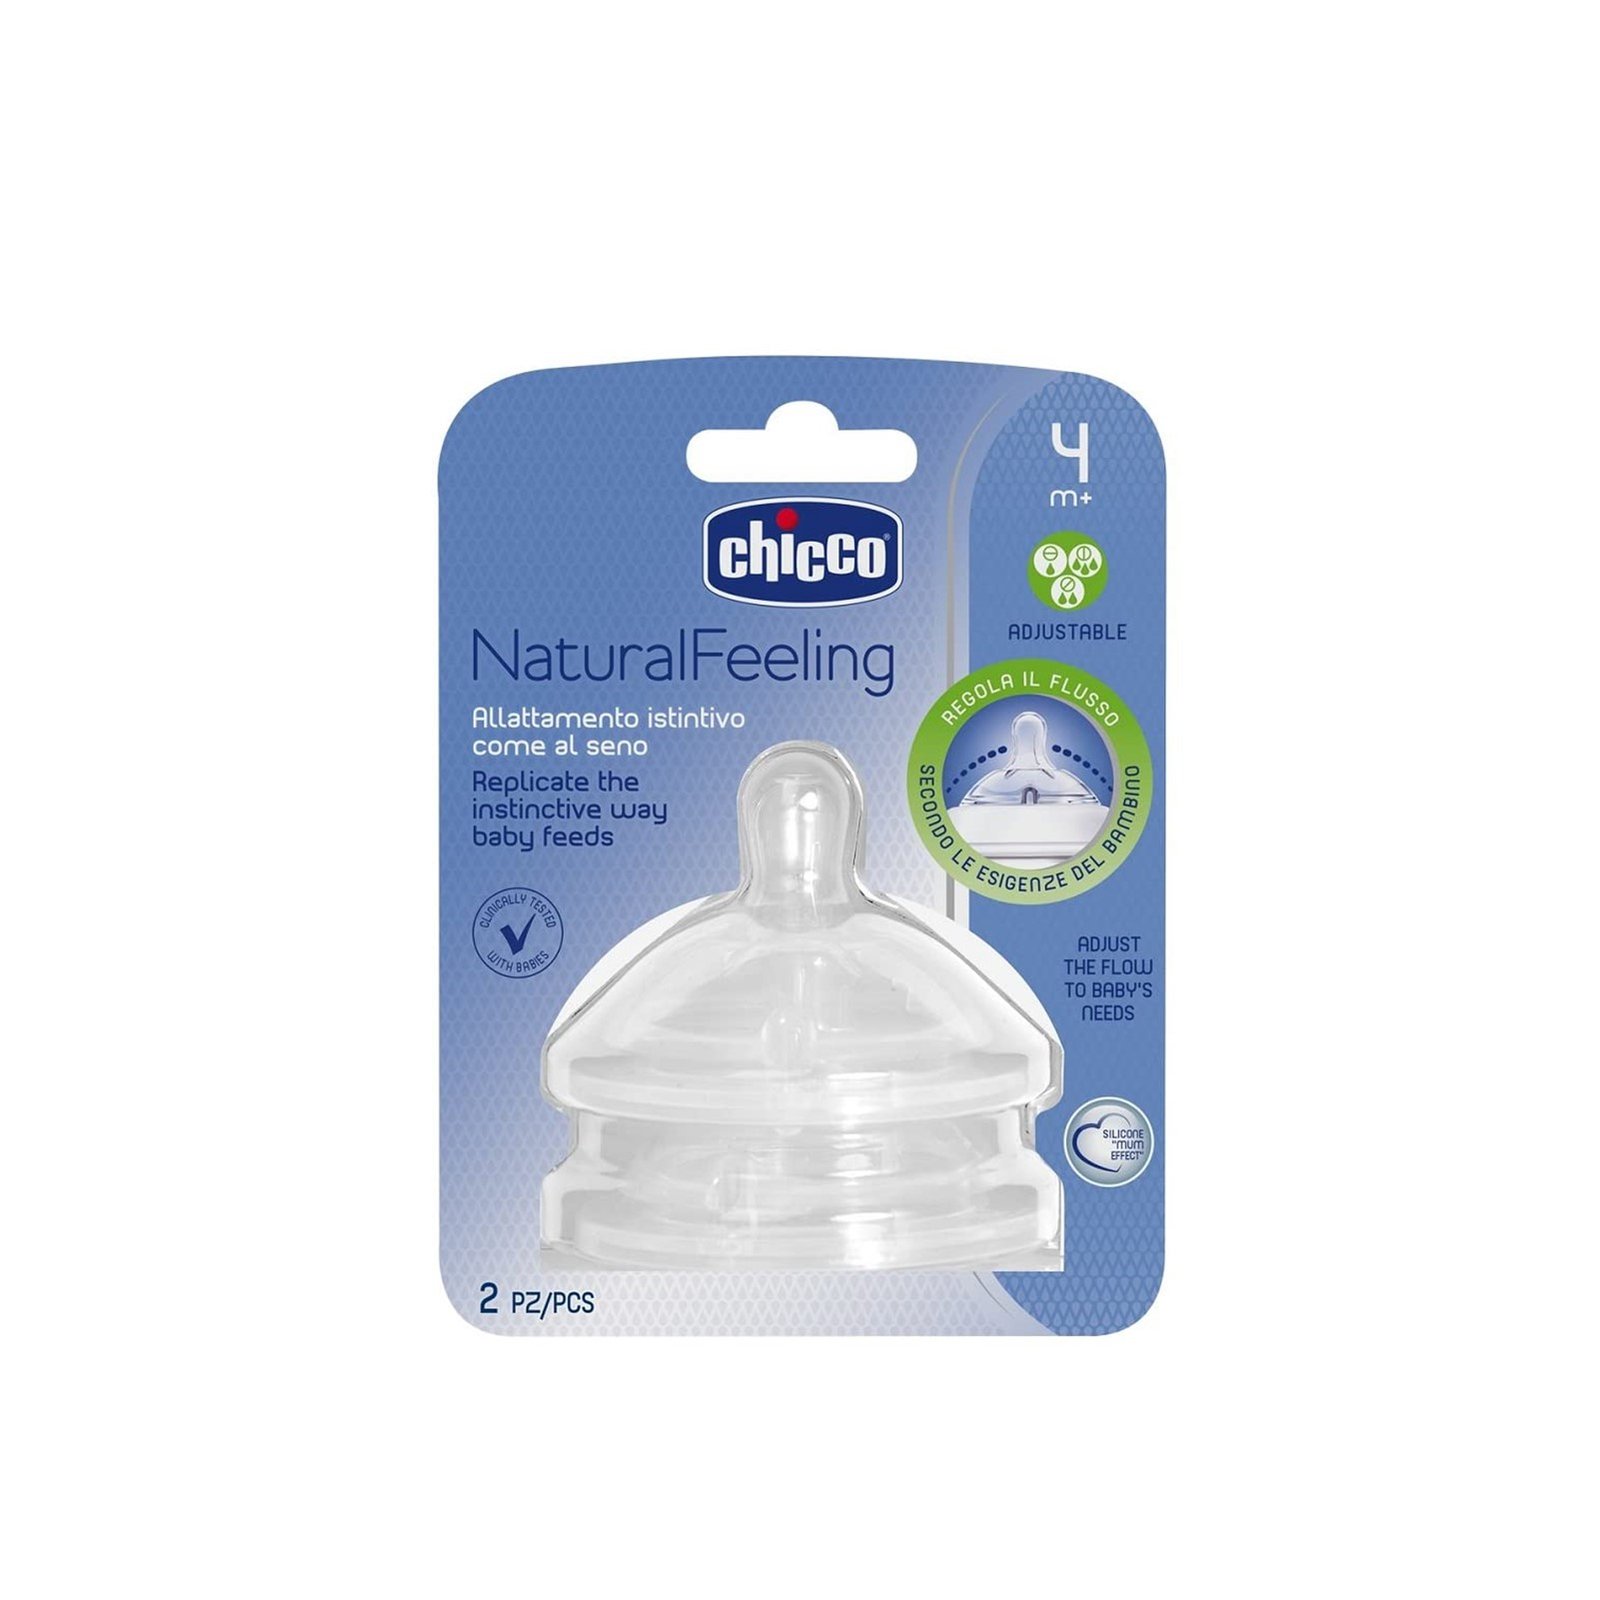 Chicco Natural Feeling Silicone Nipple Adjustable Flow 4m+ x2